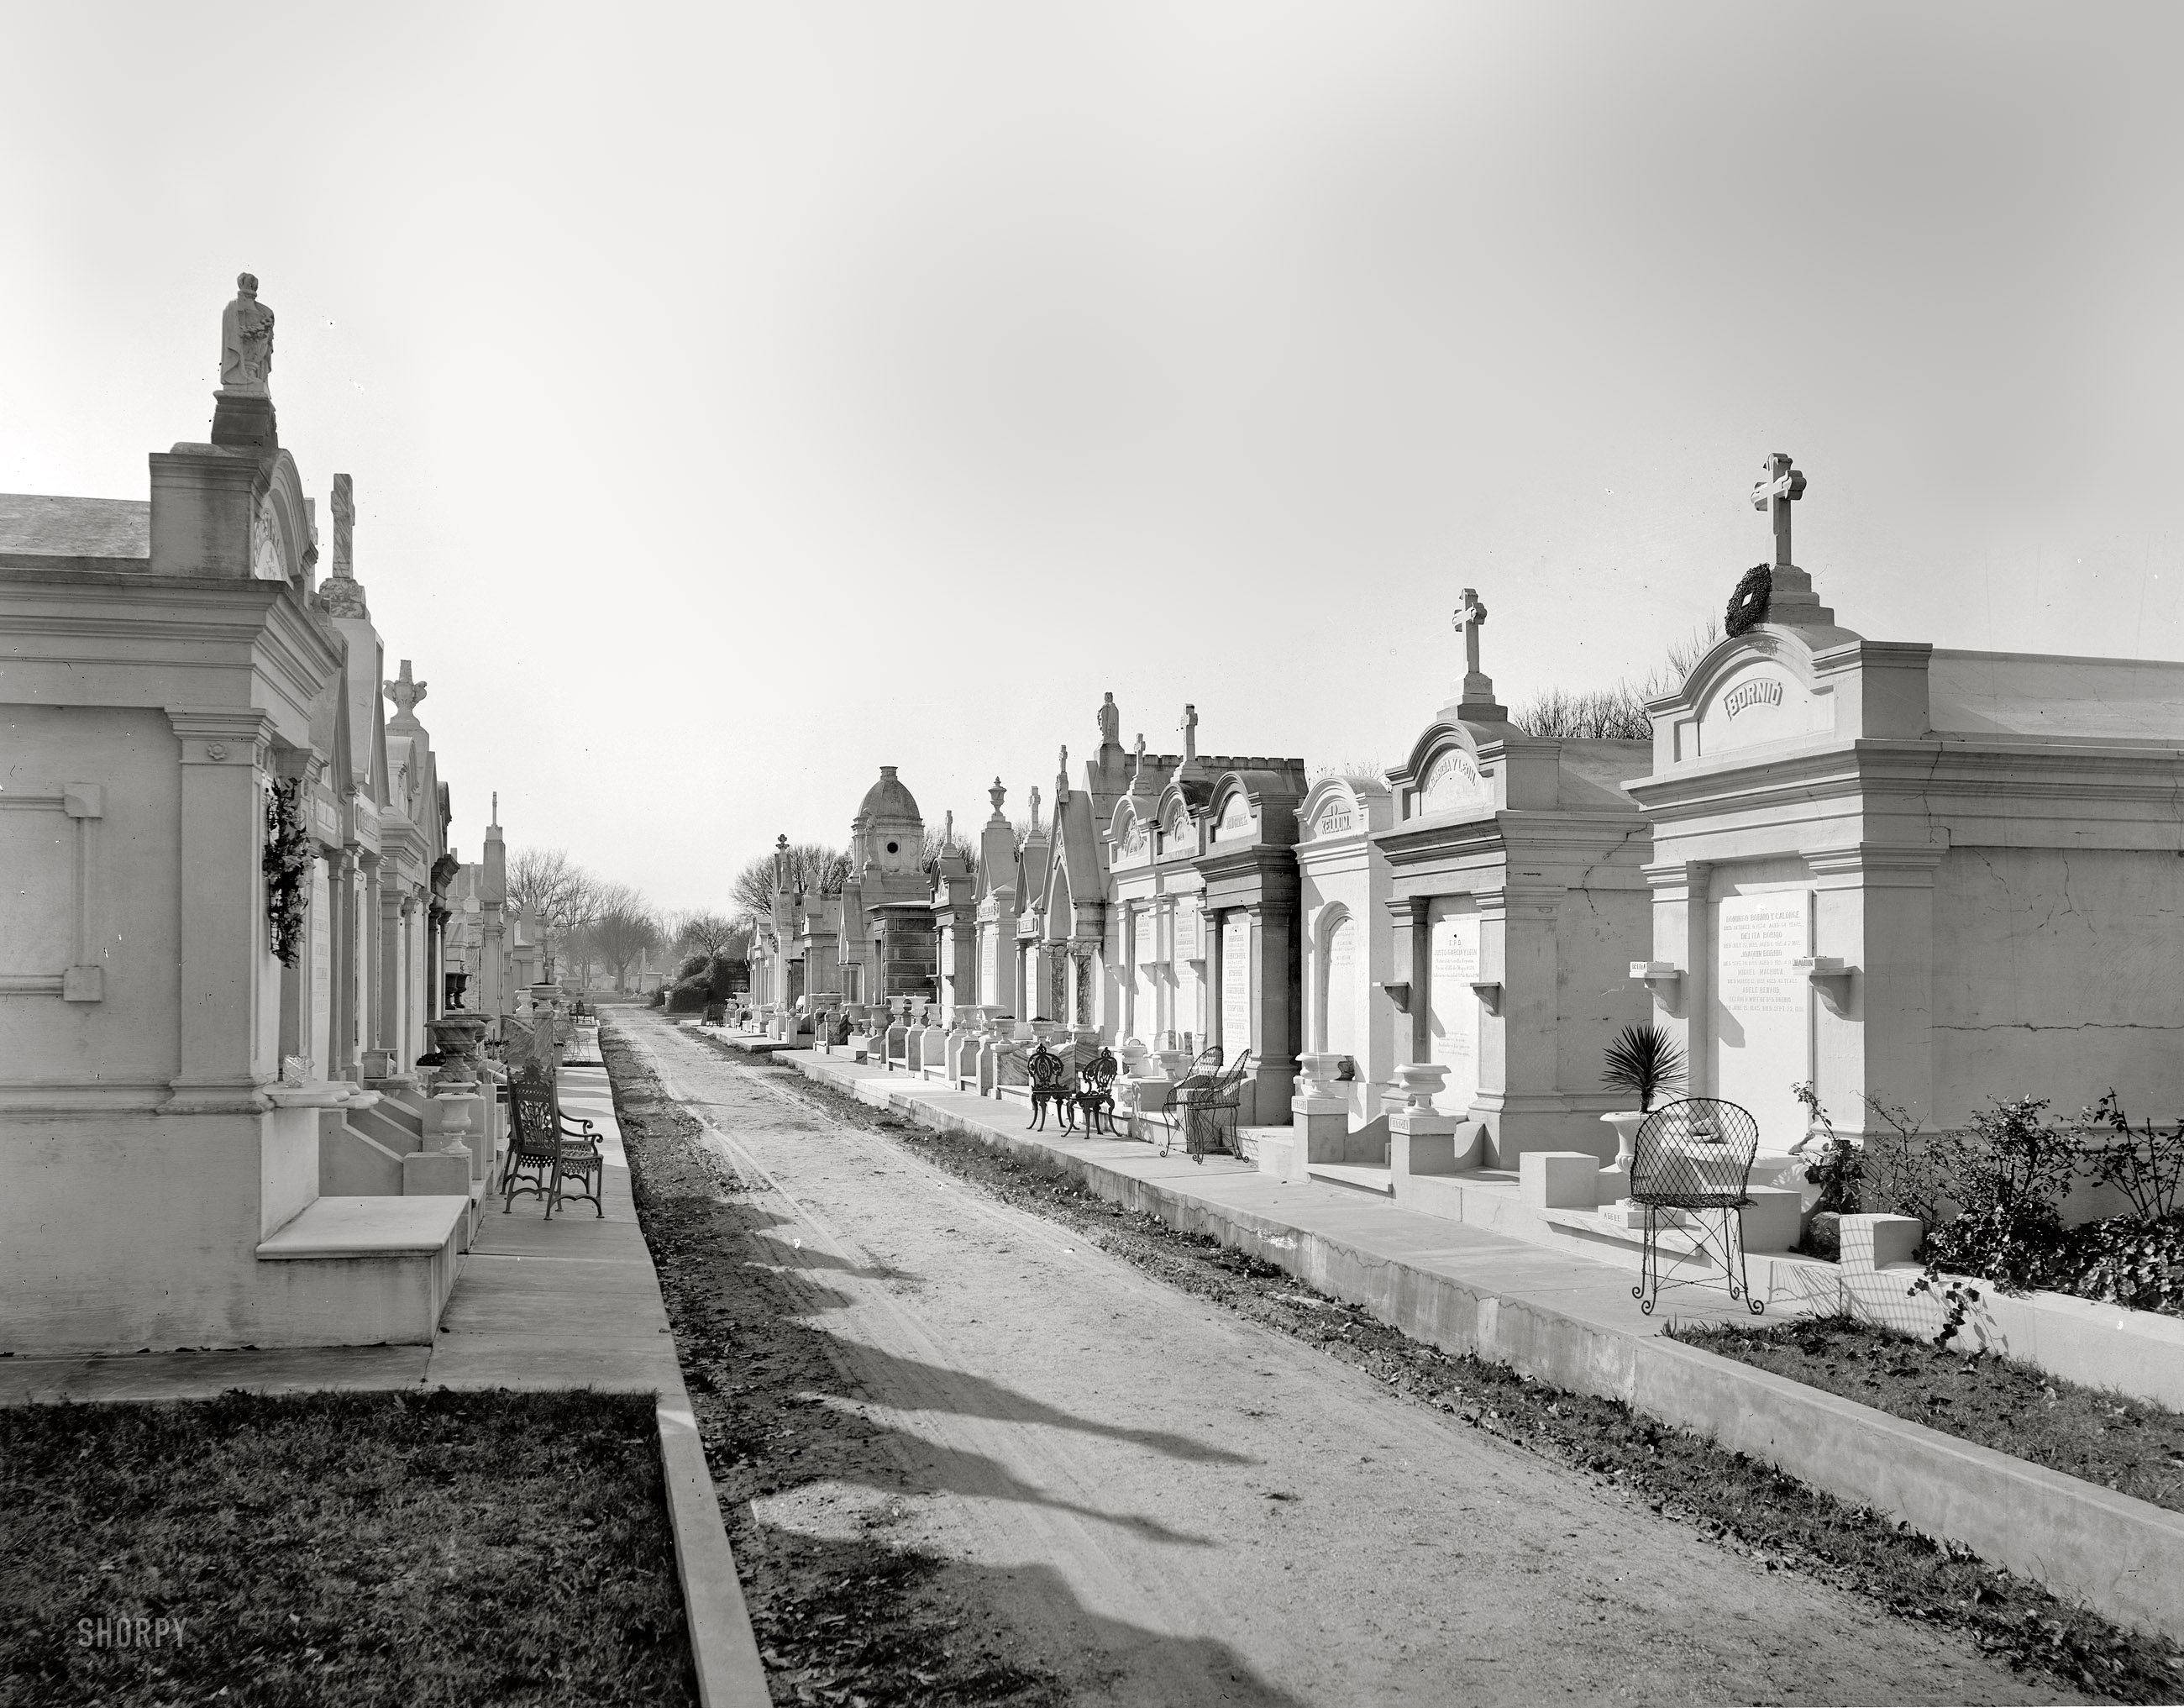 Circa 1895. "Metairie Cemetery, New Orleans." 8x10 inch dry plate glass negative, Detroit Publishing Company. View full size.